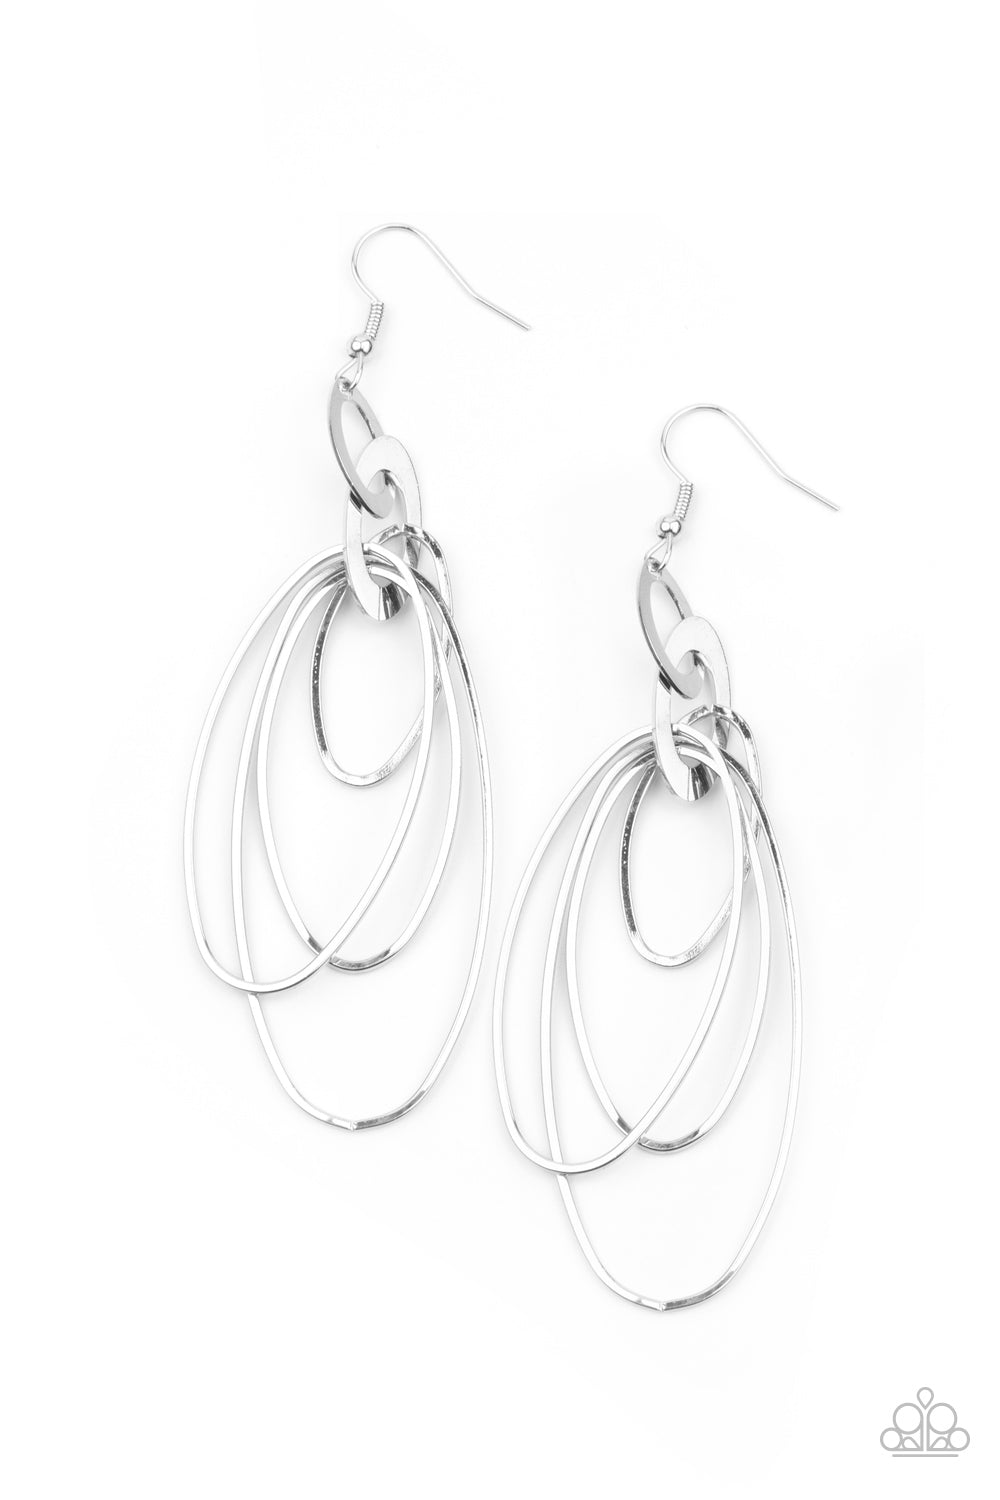 Paparazzi OVAL The Moon - Silver Earrings - A Finishing Touch Jewelry